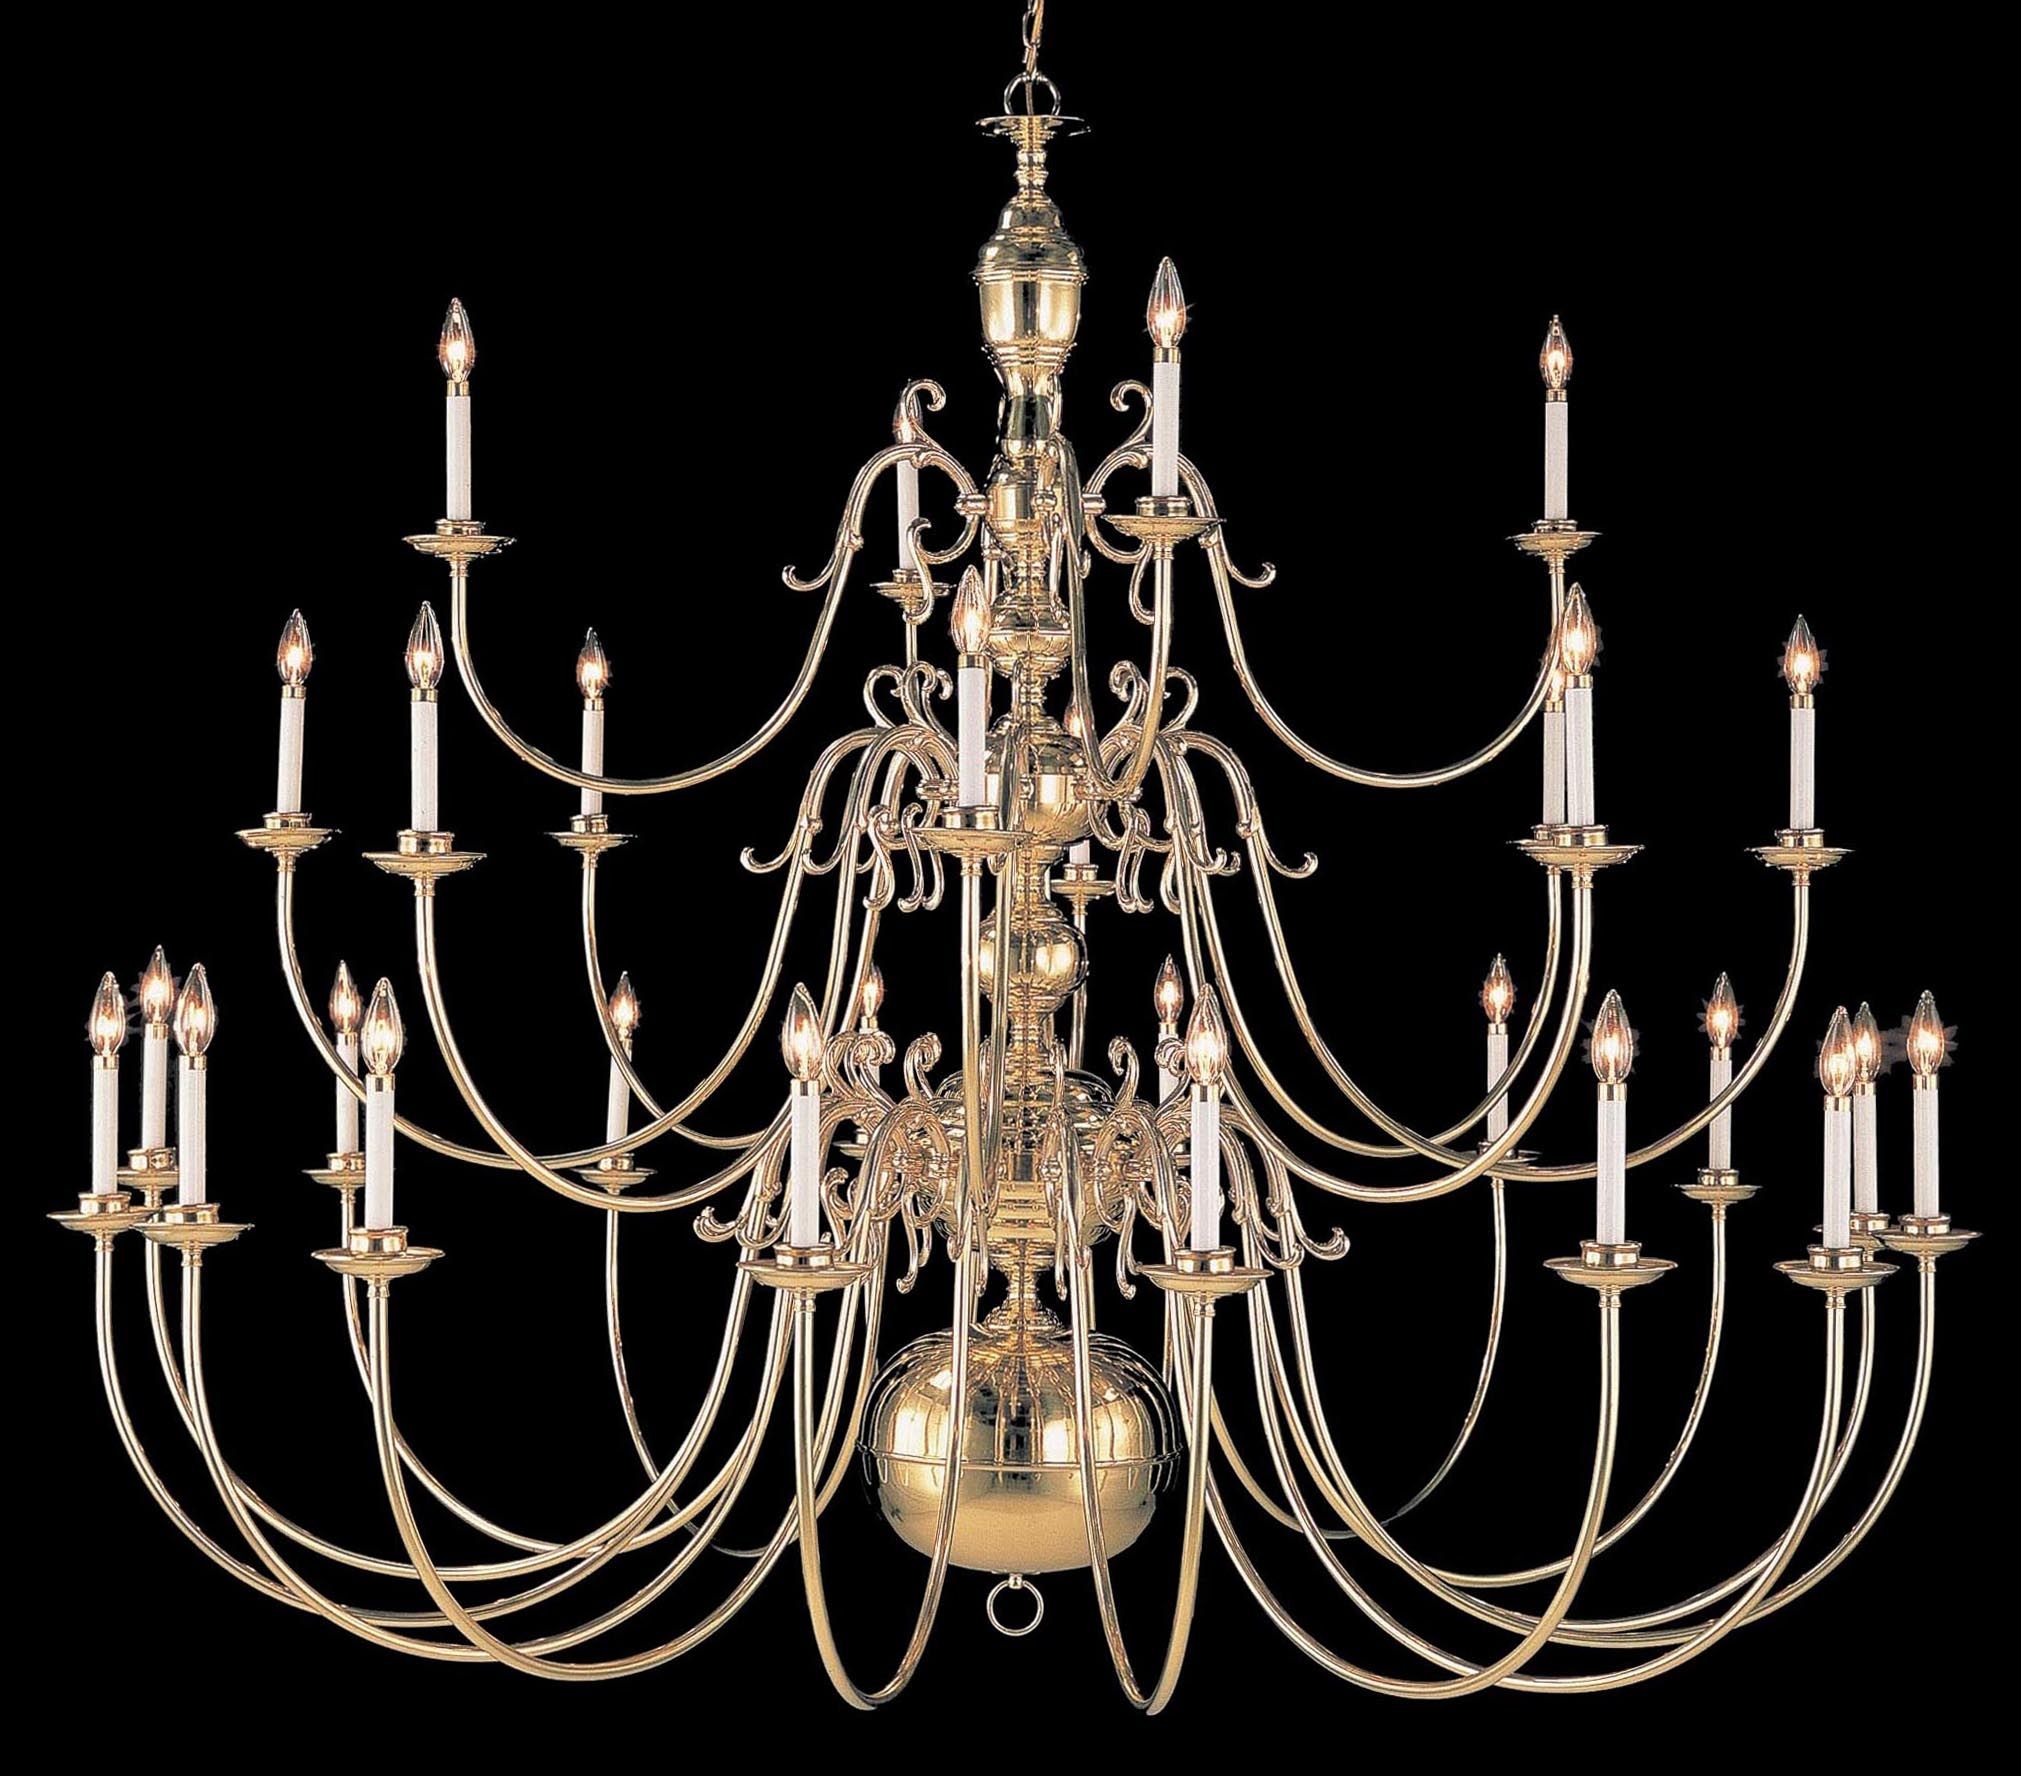 Largelighting Brassbronze Chandeliers With Large Brass Chandelier (View 2 of 15)